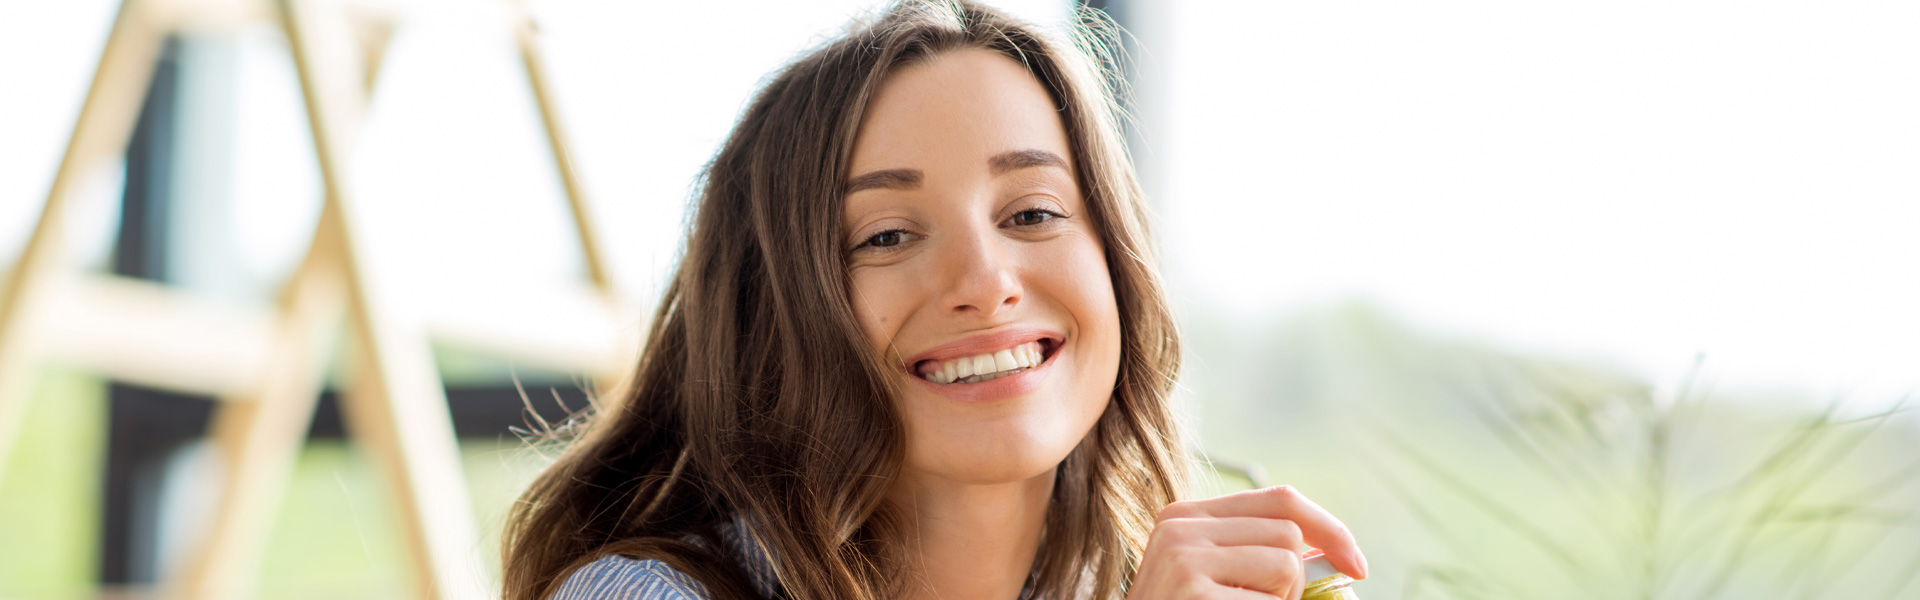 Cosmetic Dentistry vs. Orthodontics – What Are the Differences?